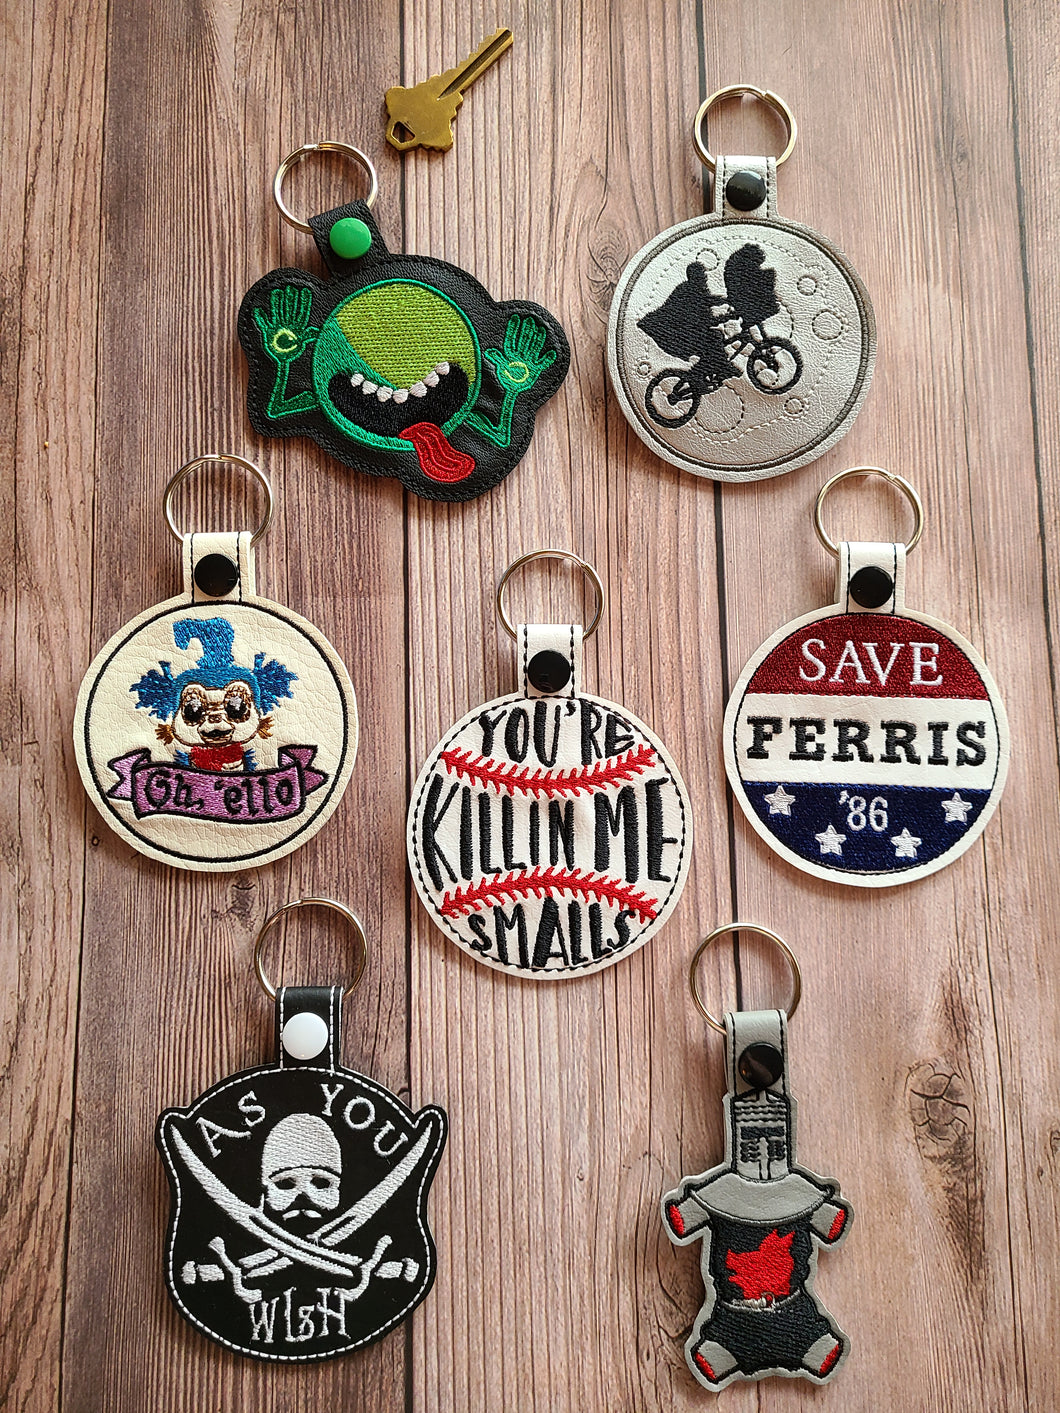 Key Fobs Inspired By Pop Culture Movie Characters - Keychains - Backpack Decoration - Bag Bling